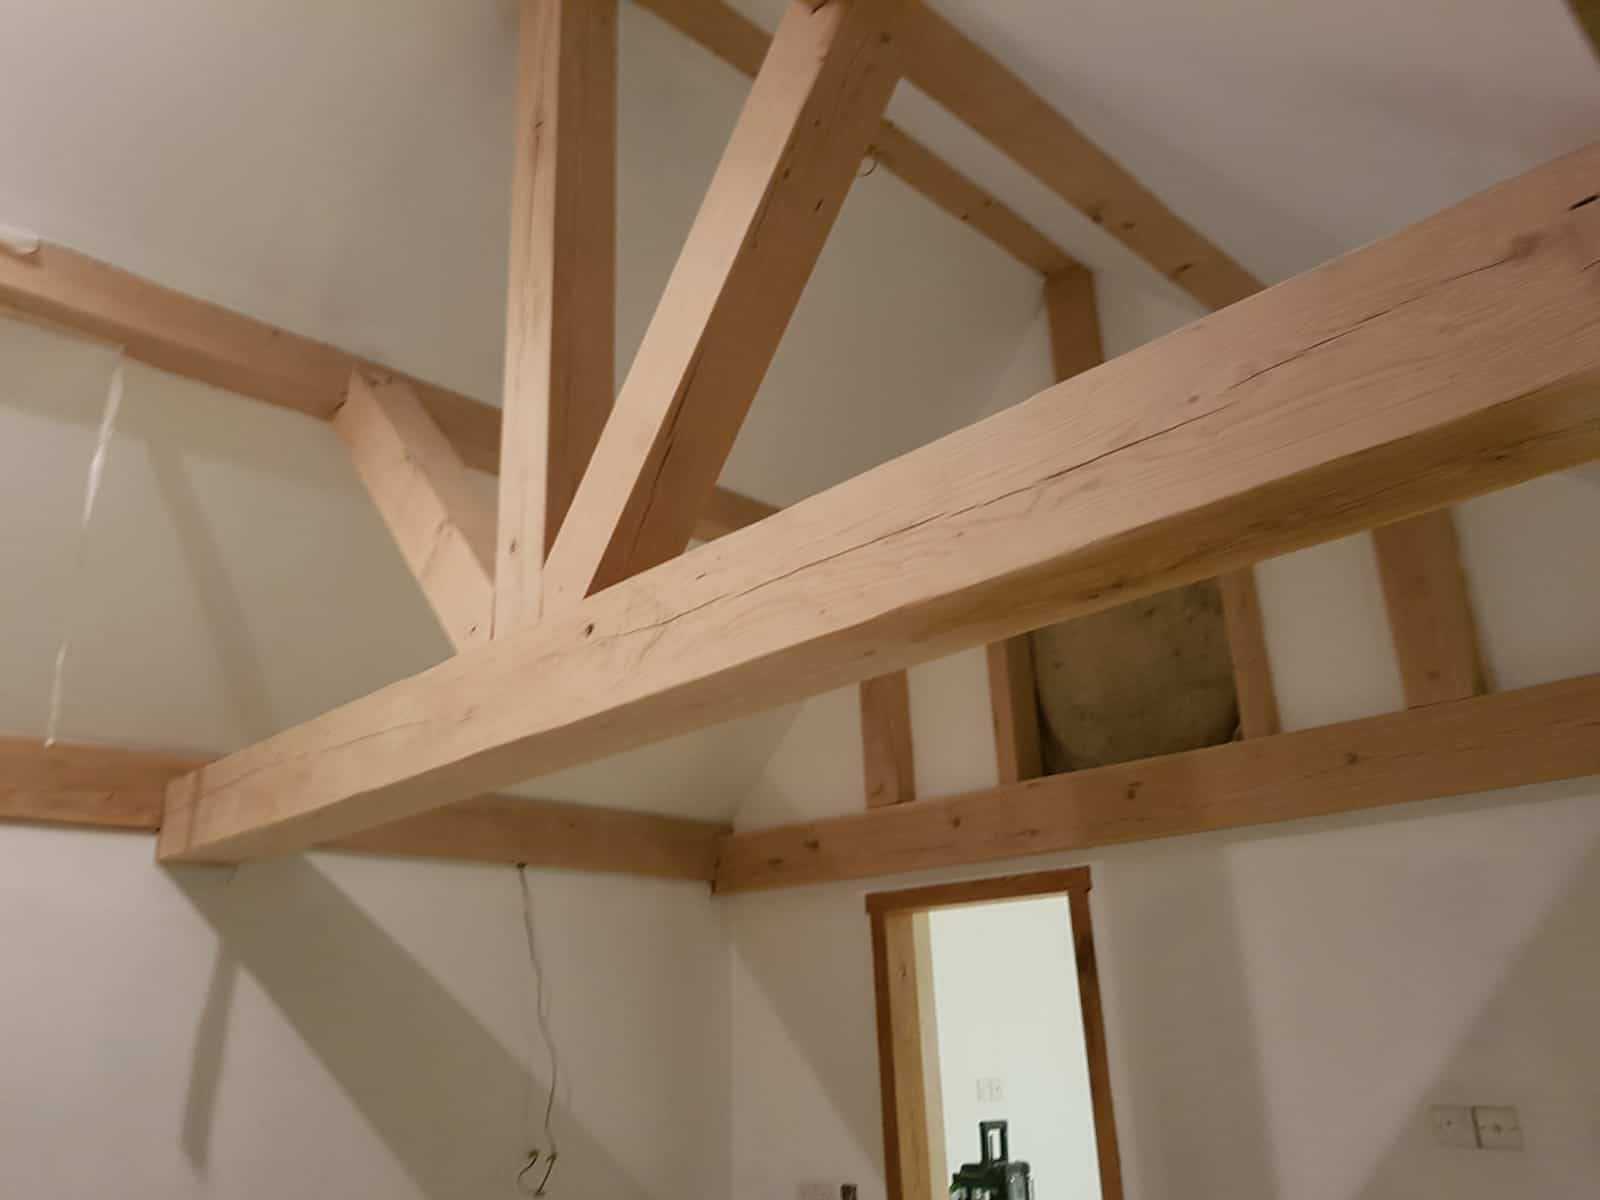 Timber roof beams support